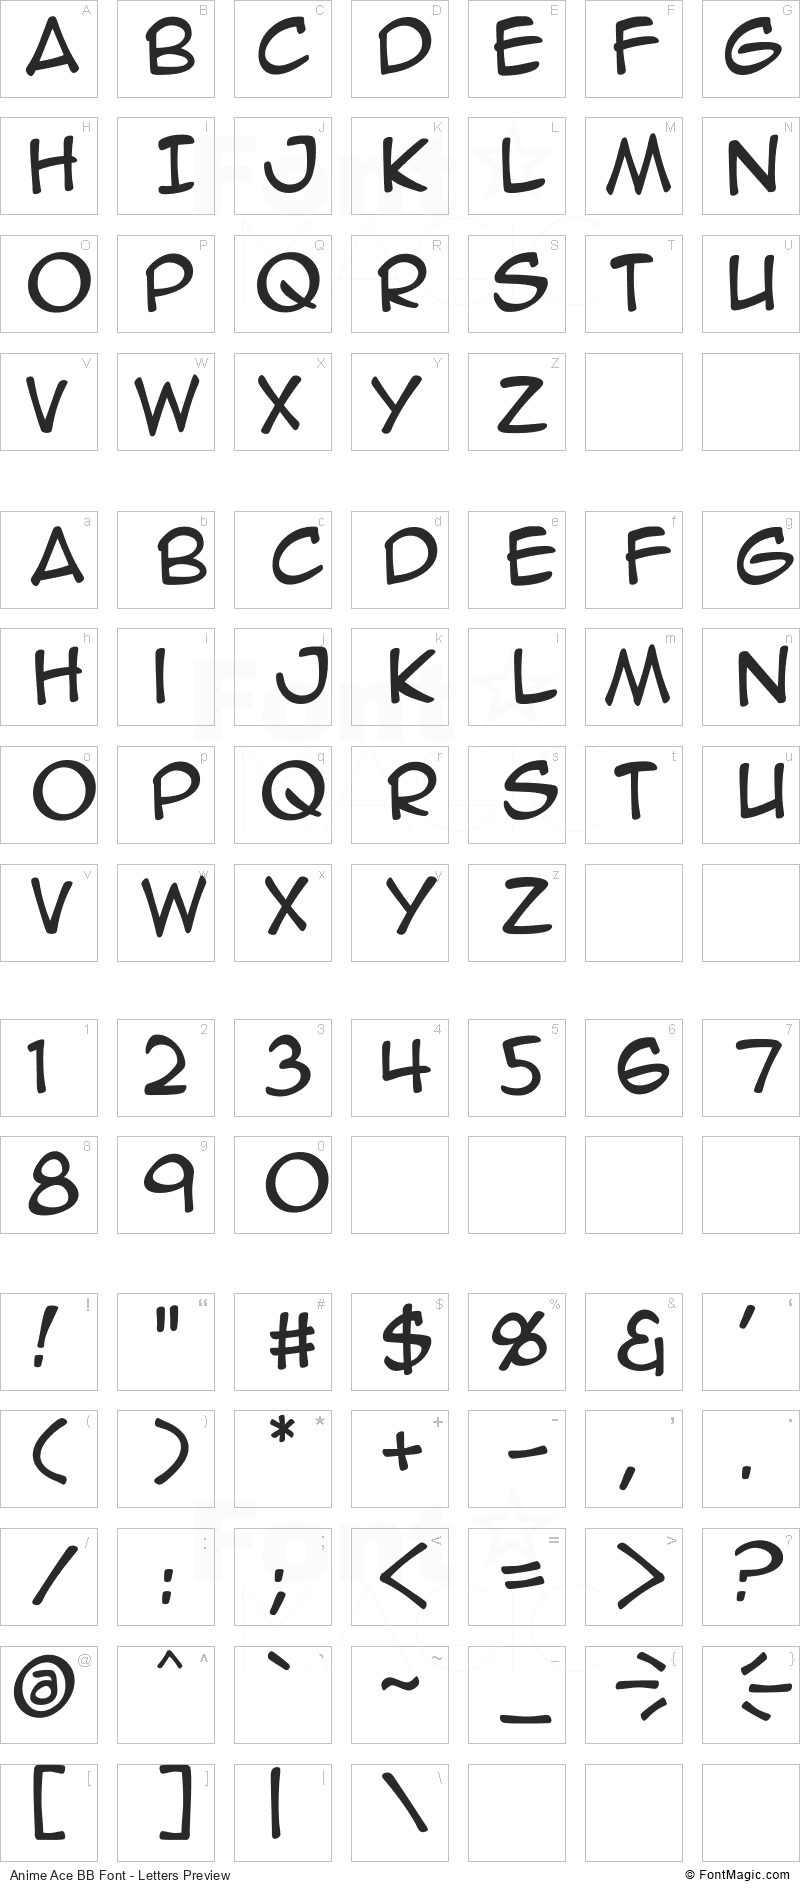 Anime Ace BB Font - All Latters Preview Chart